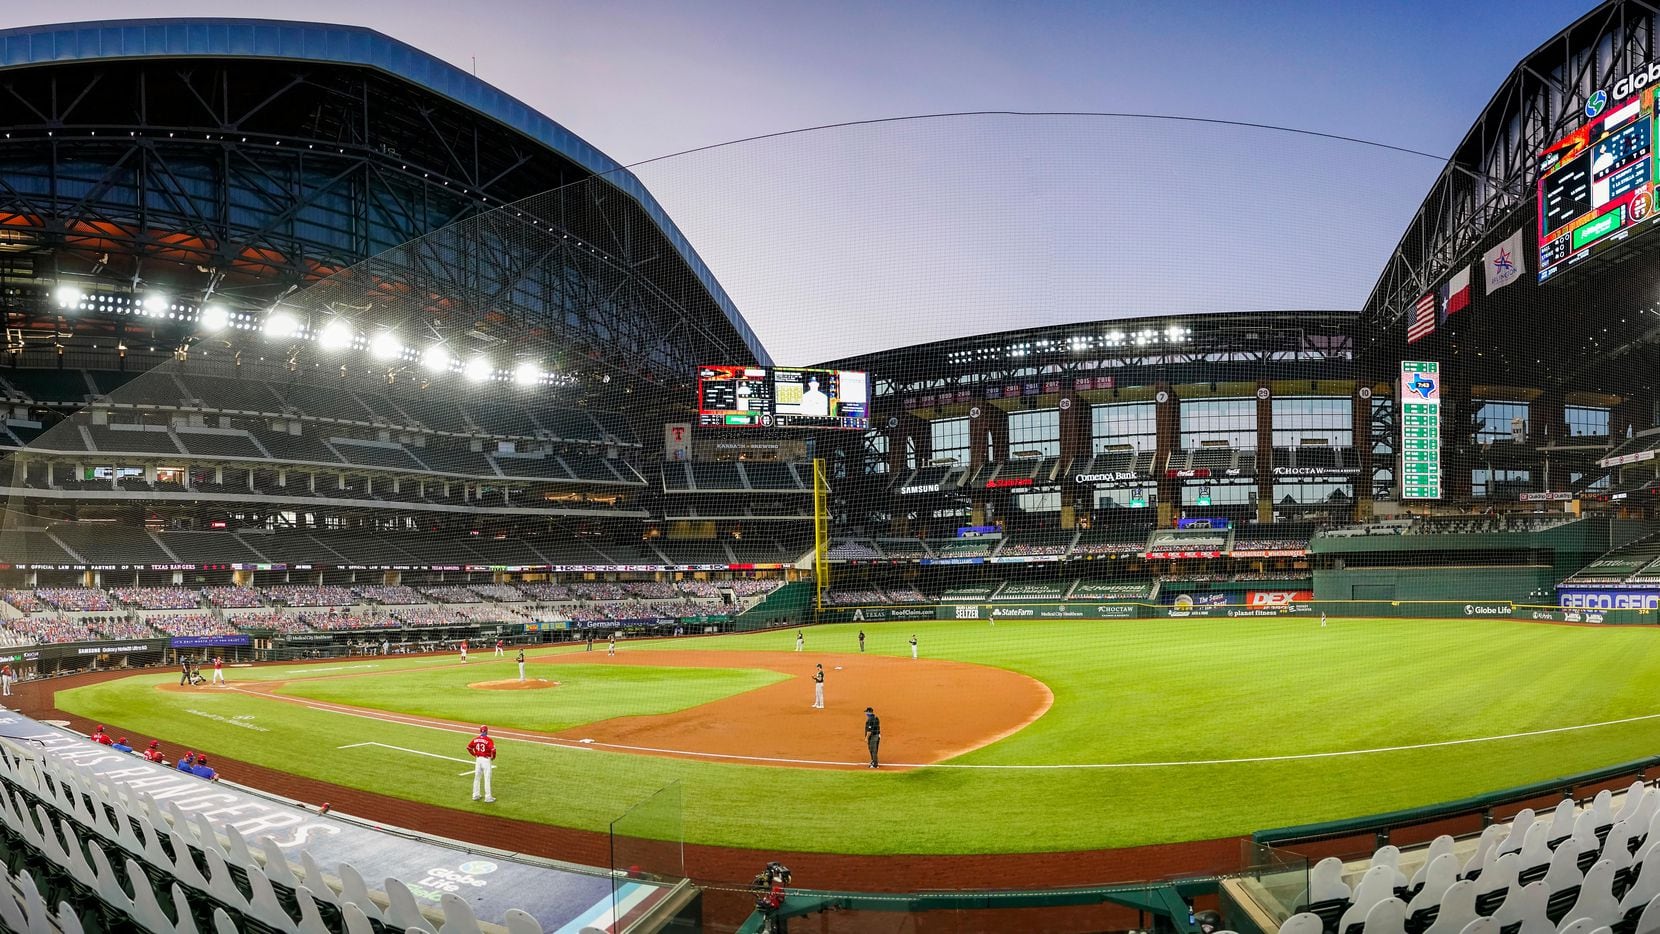 The ball hasn’t carried well at Globe Life Field this season. Jon Daniels wants the Rangers to